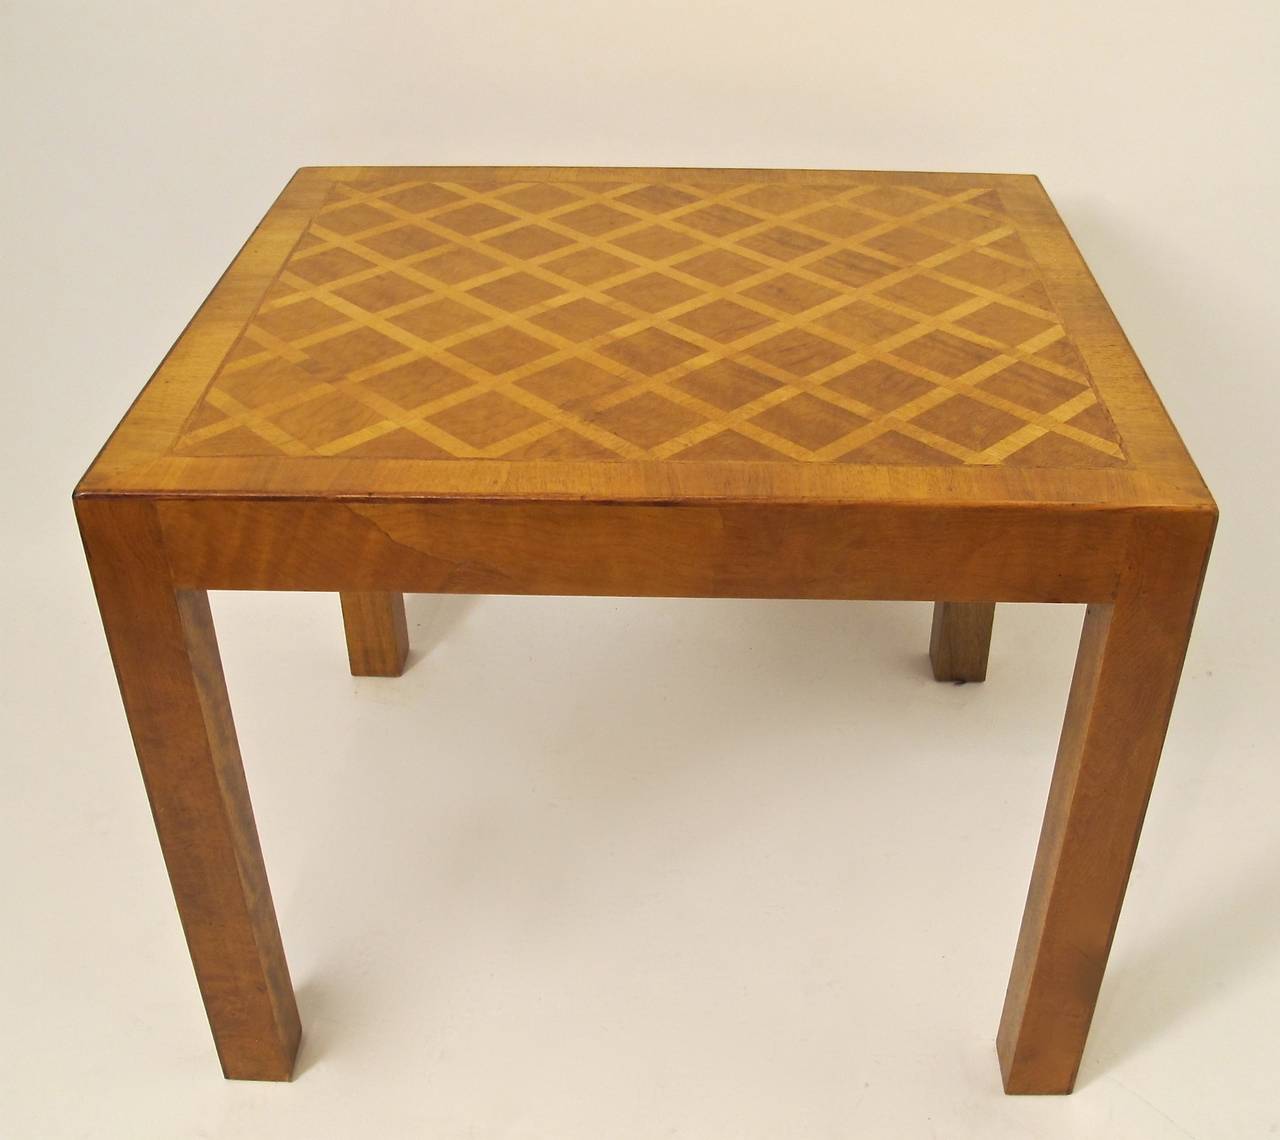 Inlaid walnut and olive wood parsons side table with lattice pattern top, and quarter round walnut inlay on the top and leg edges. Has fitted glass top. Italian, circa 1970's.